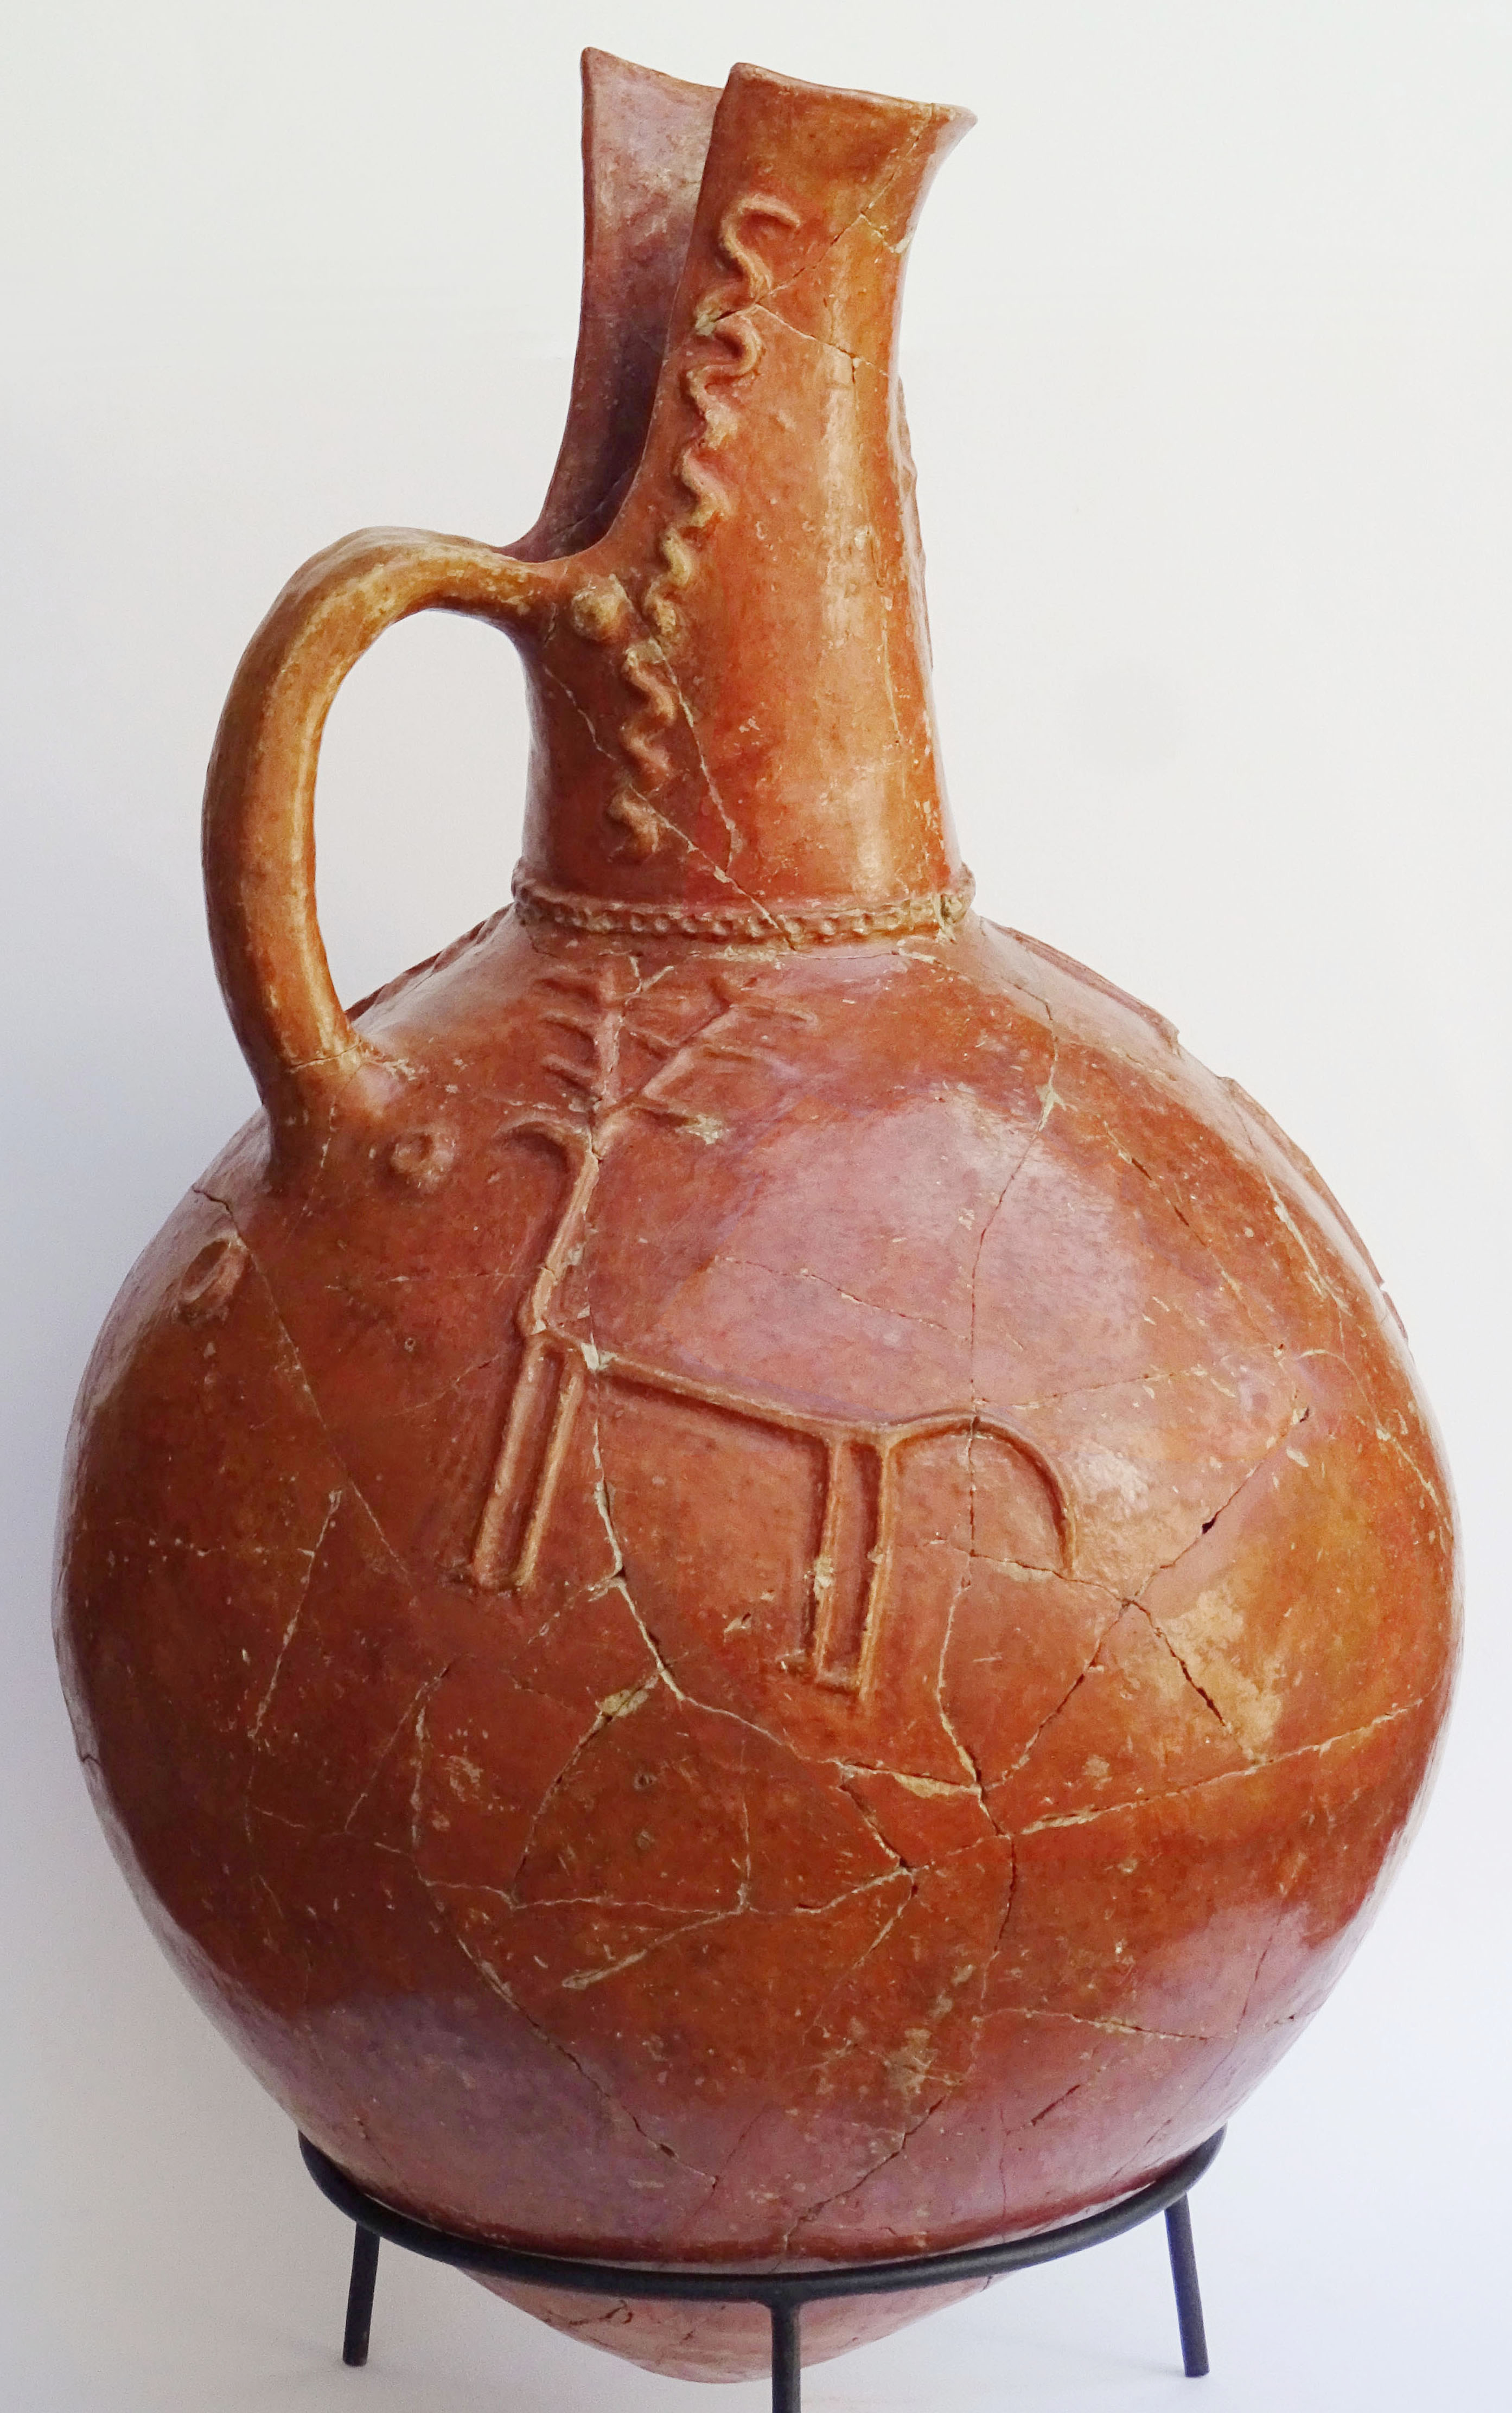 very large jug with 2 stags, 2 (goats ?) and snakes